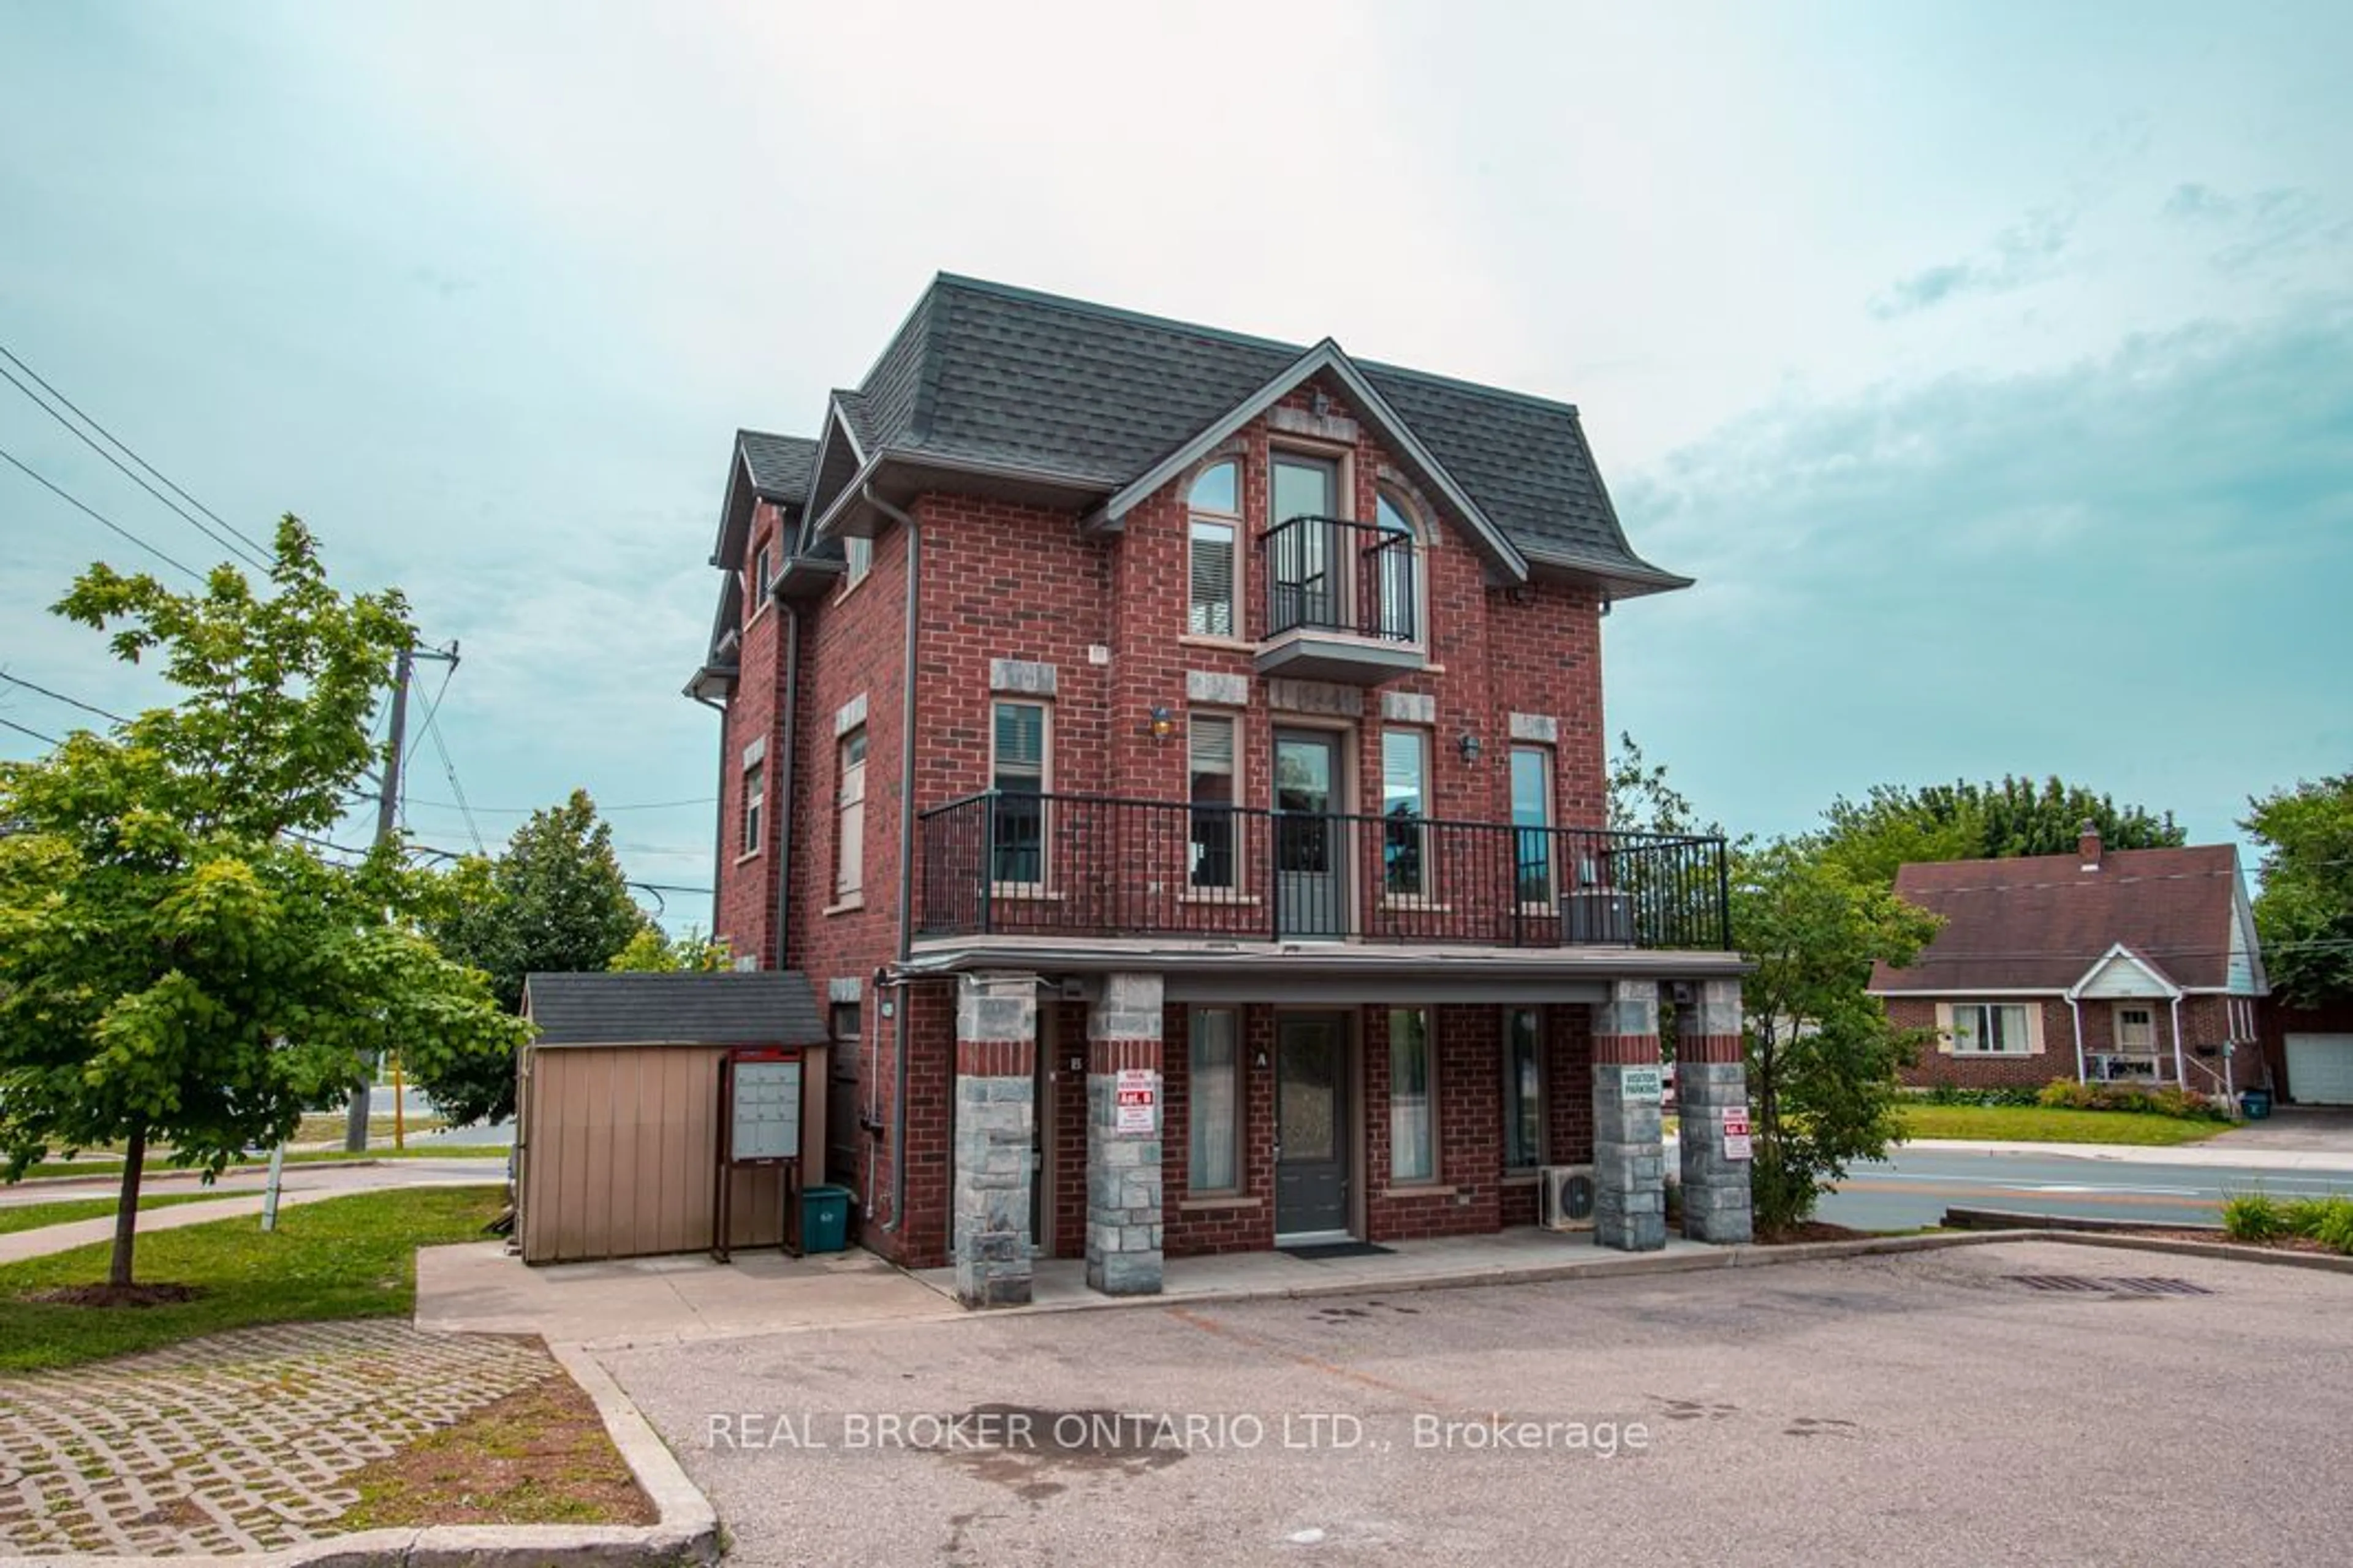 Home with brick exterior material for 489 East Ave #B, Kitchener Ontario N2H 0A8